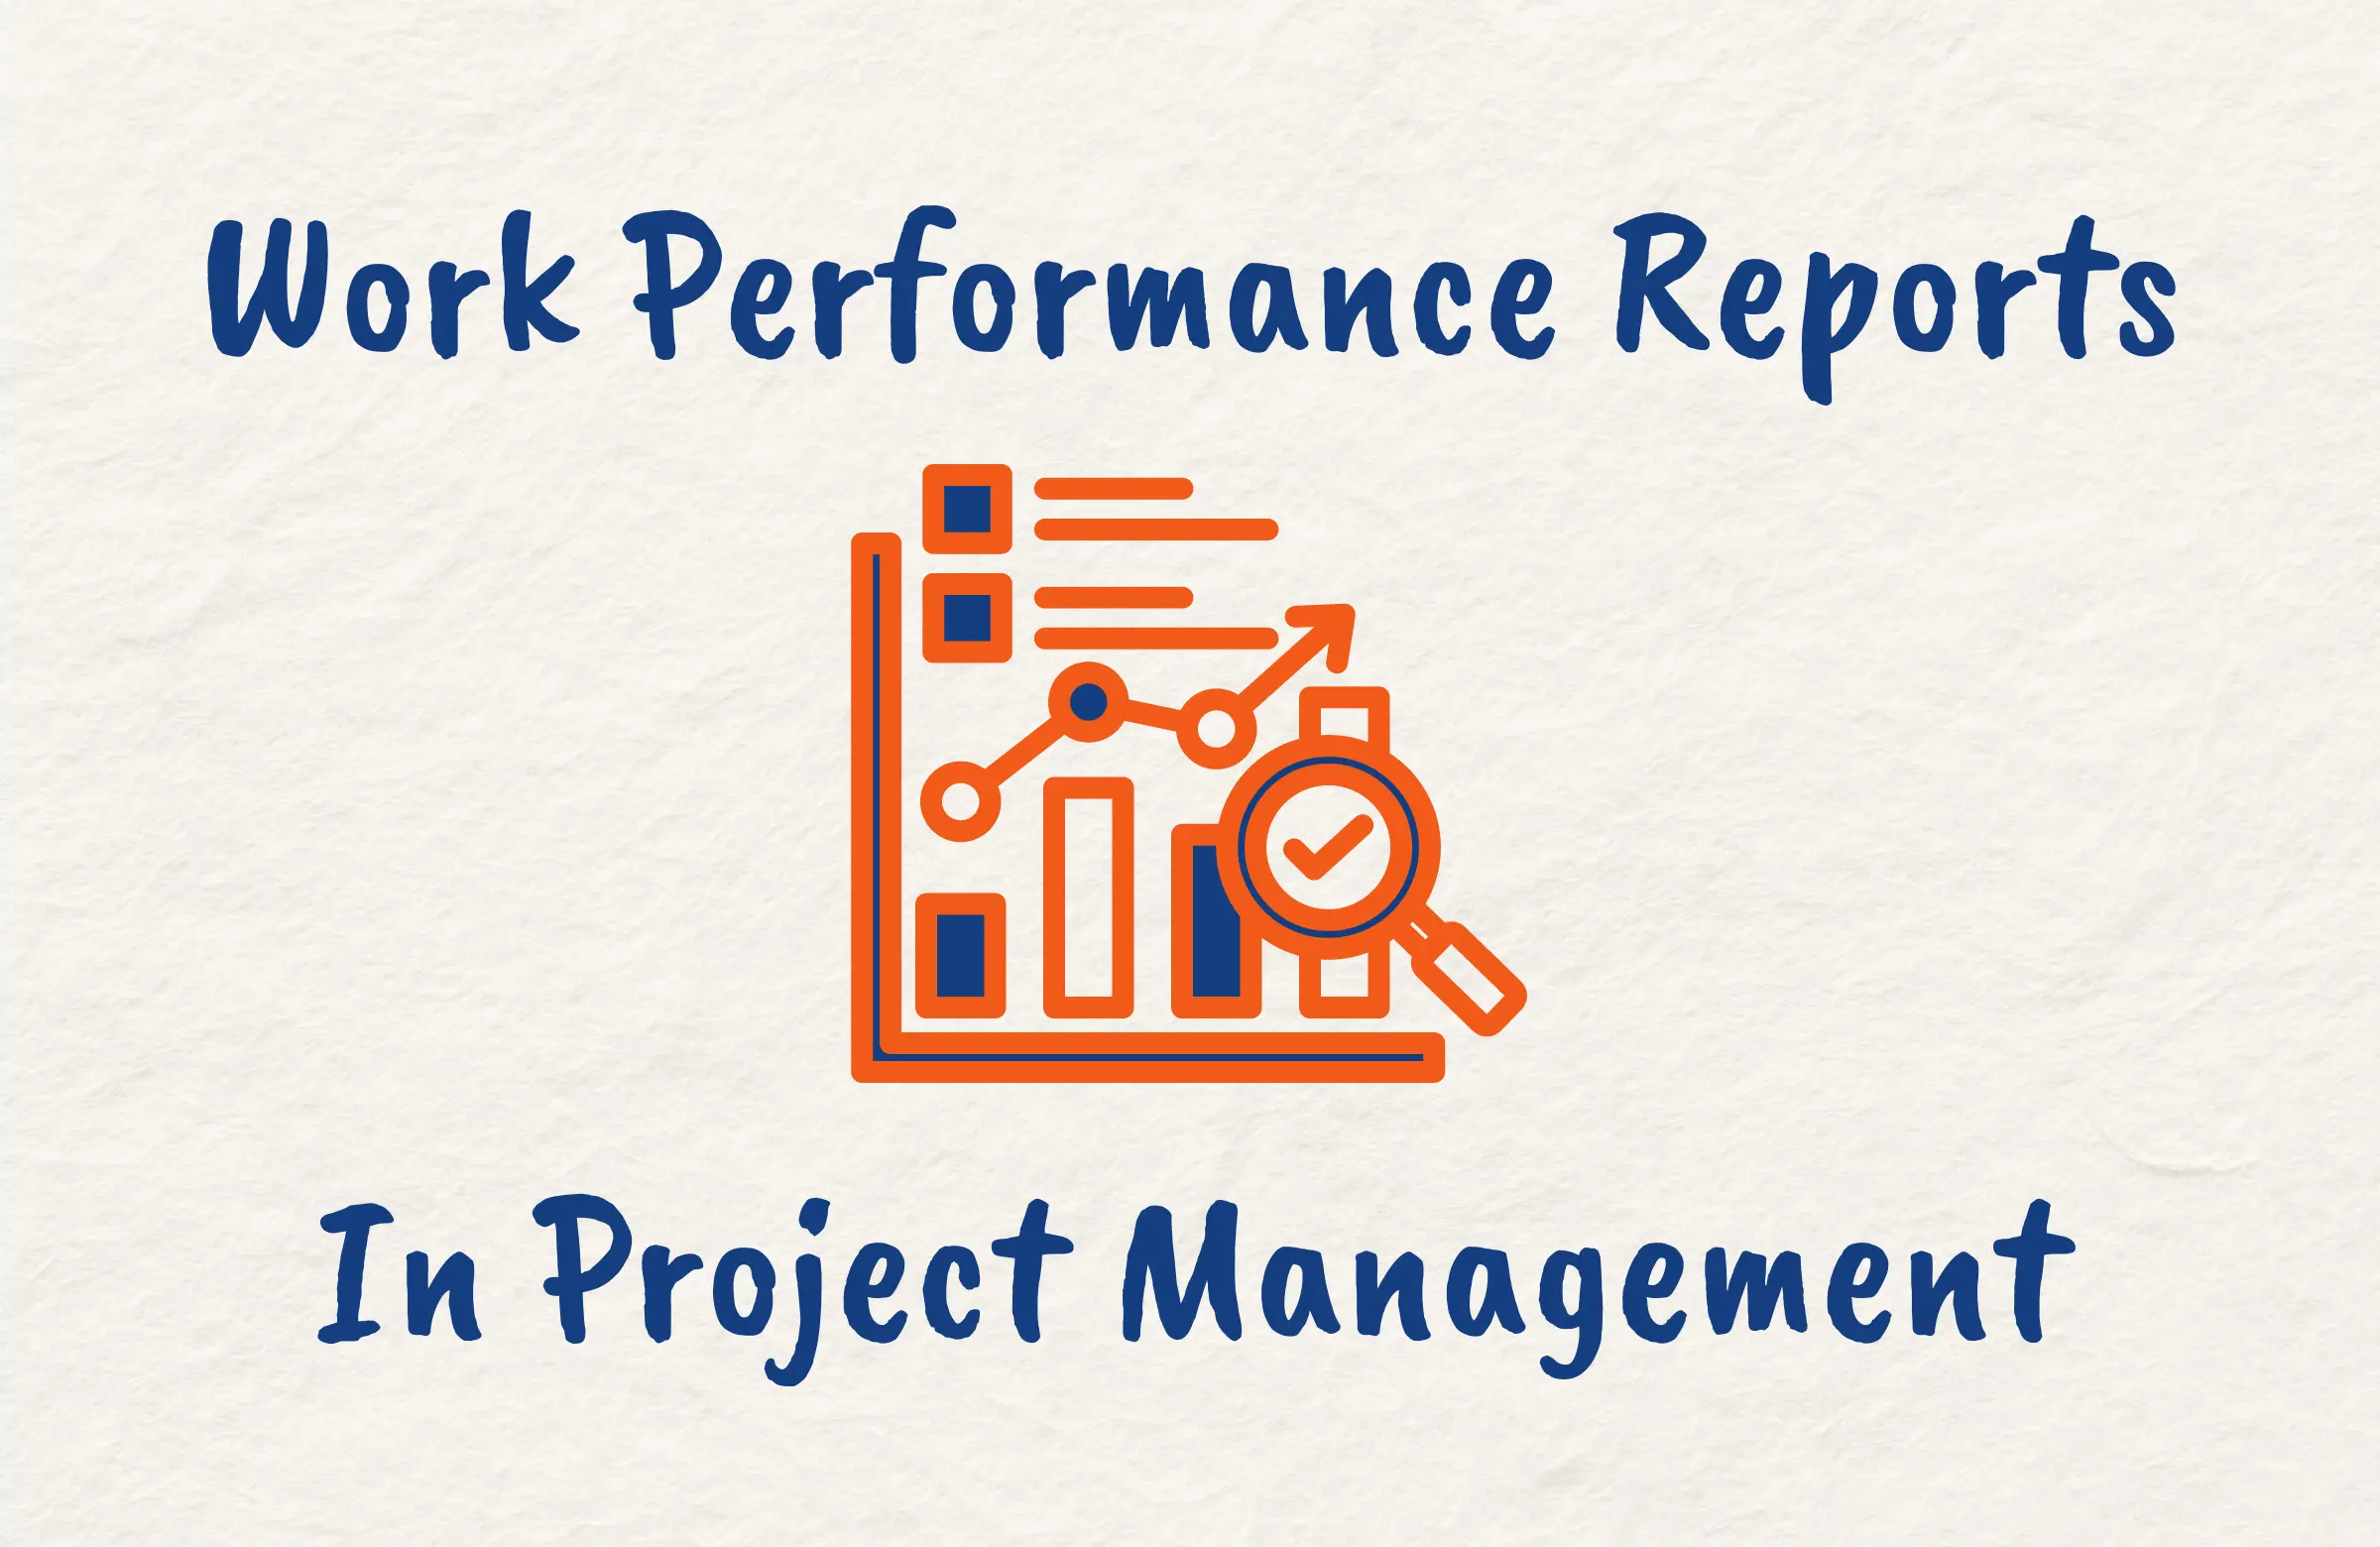 Work Performance Reports in Project Management